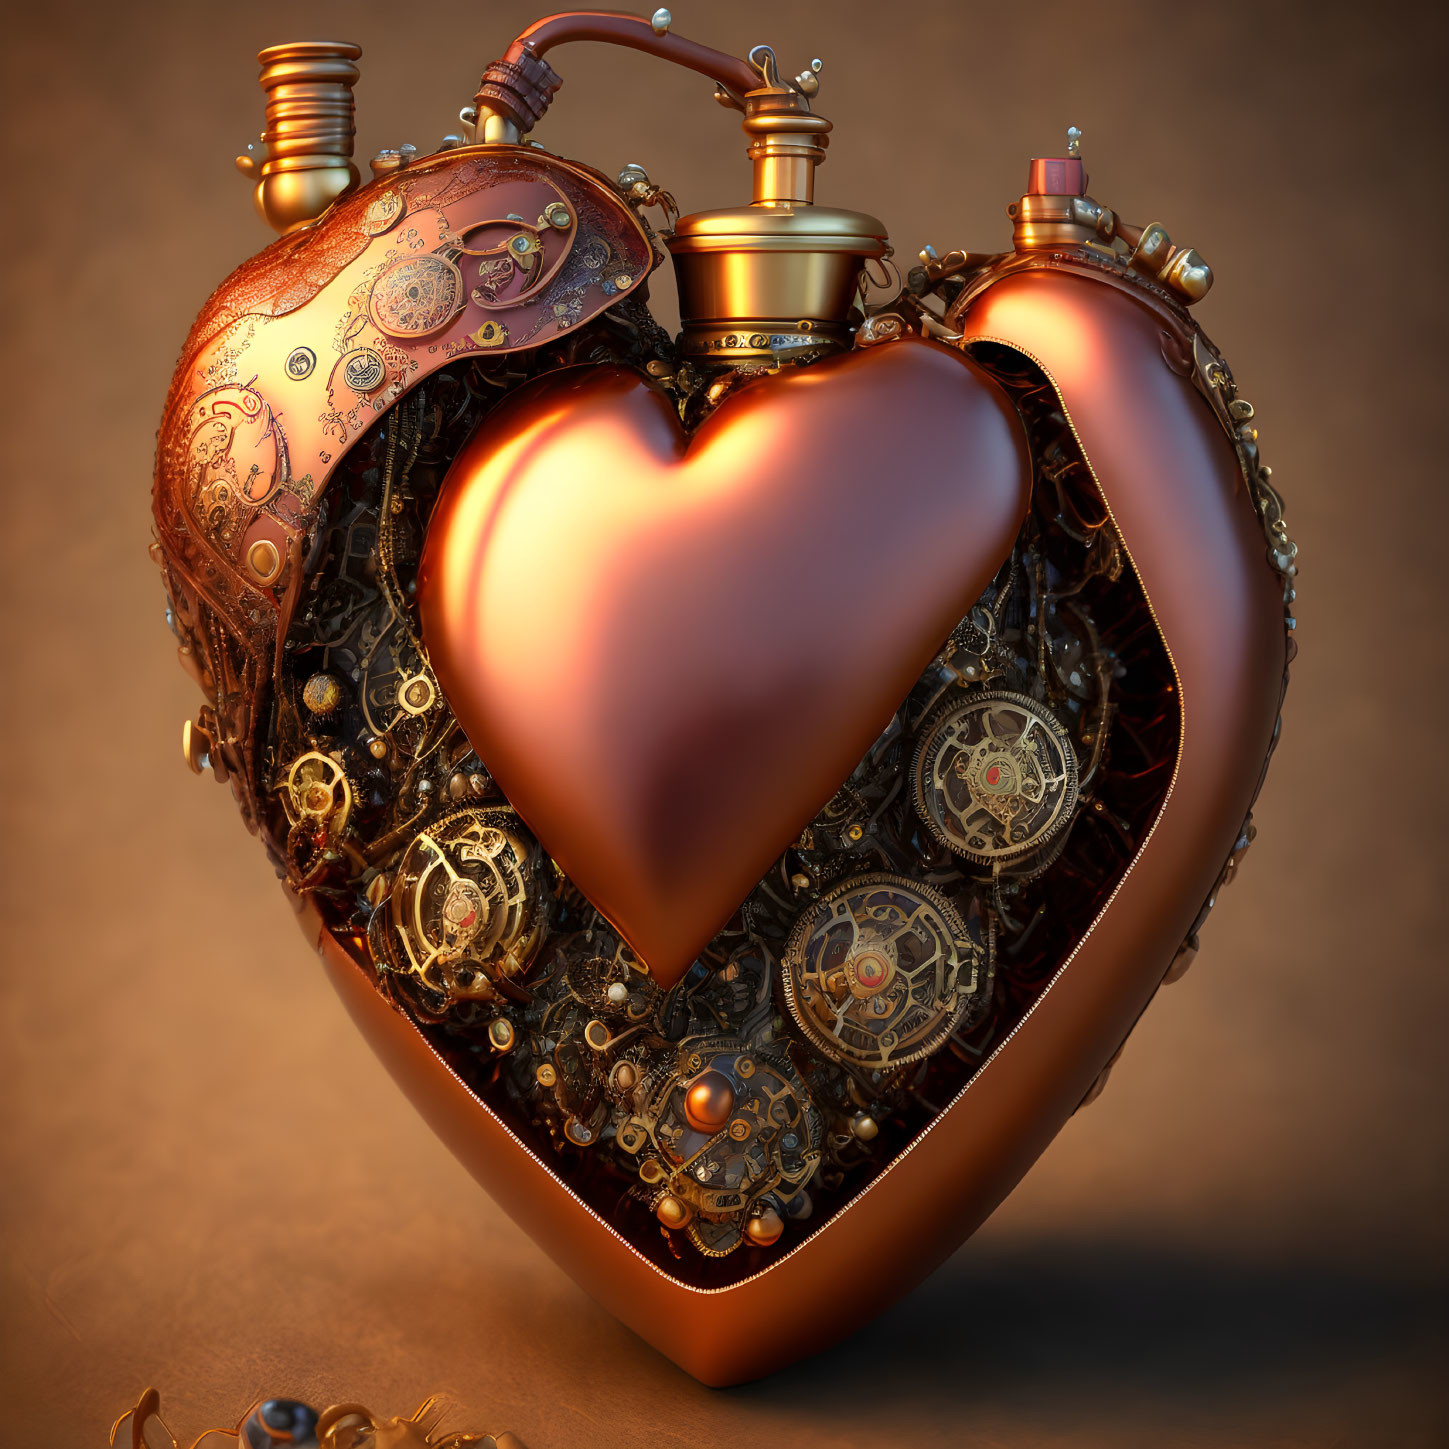 Steampunk heart with gears and metallic decorations on warm background